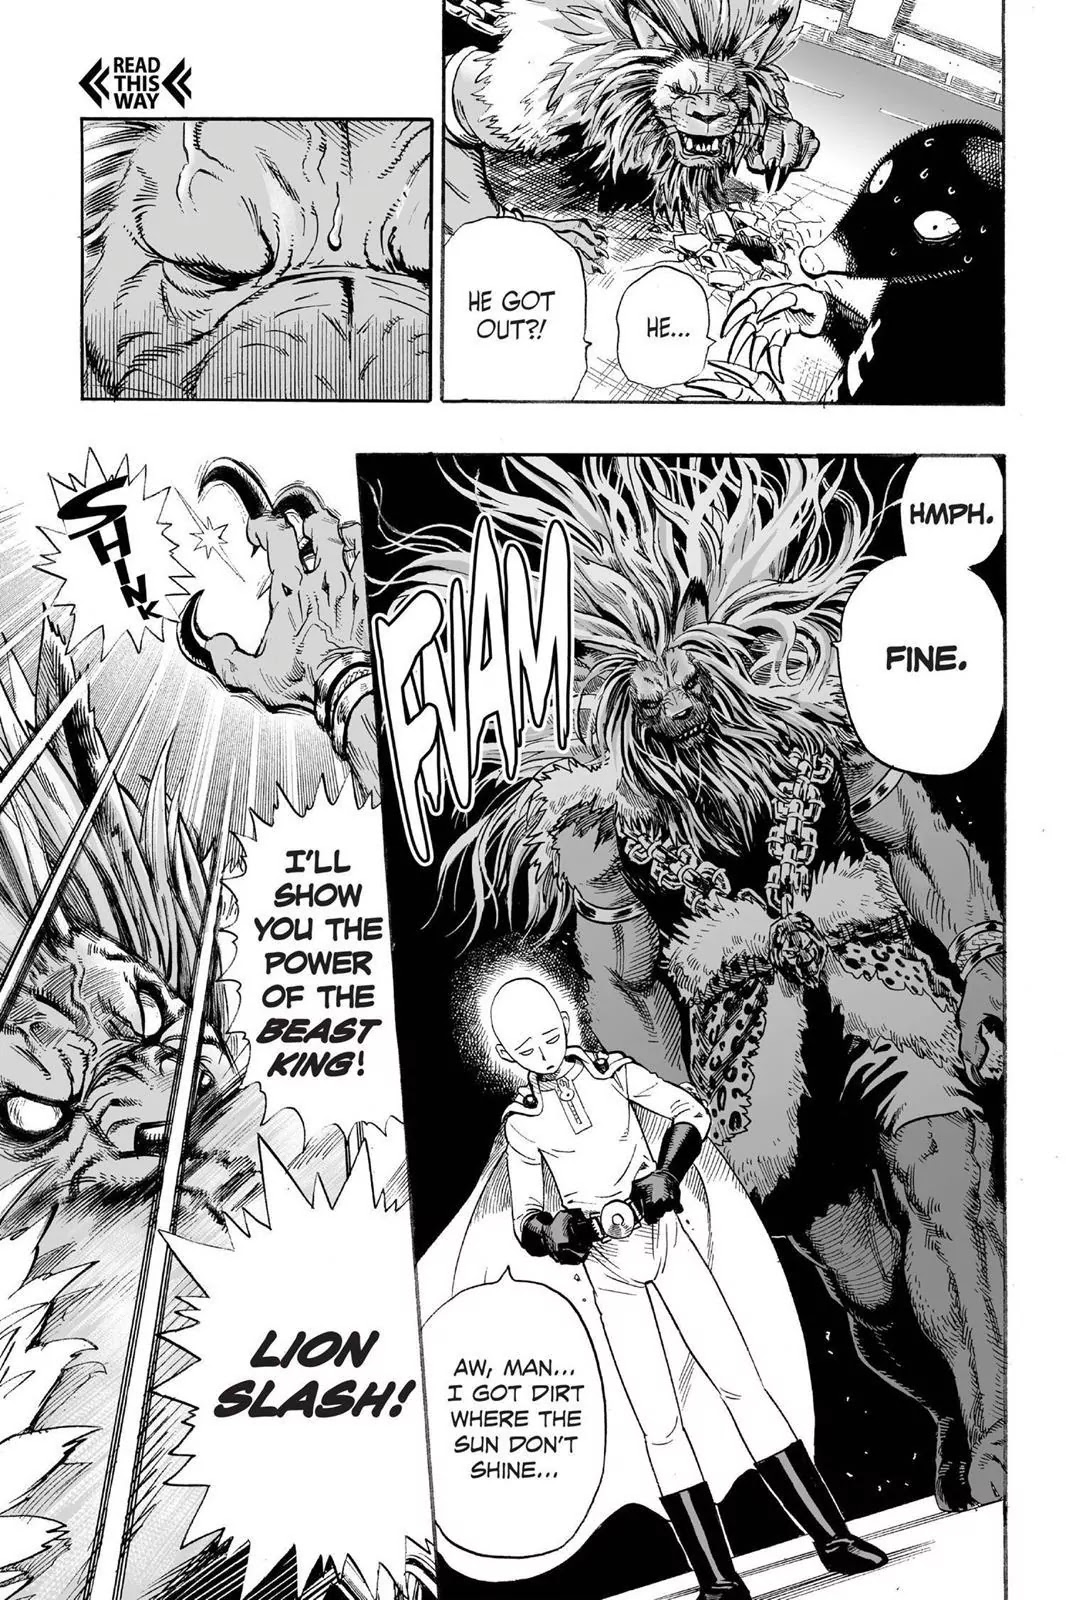 One Punch Man, Chapter 8 This Guy image 13